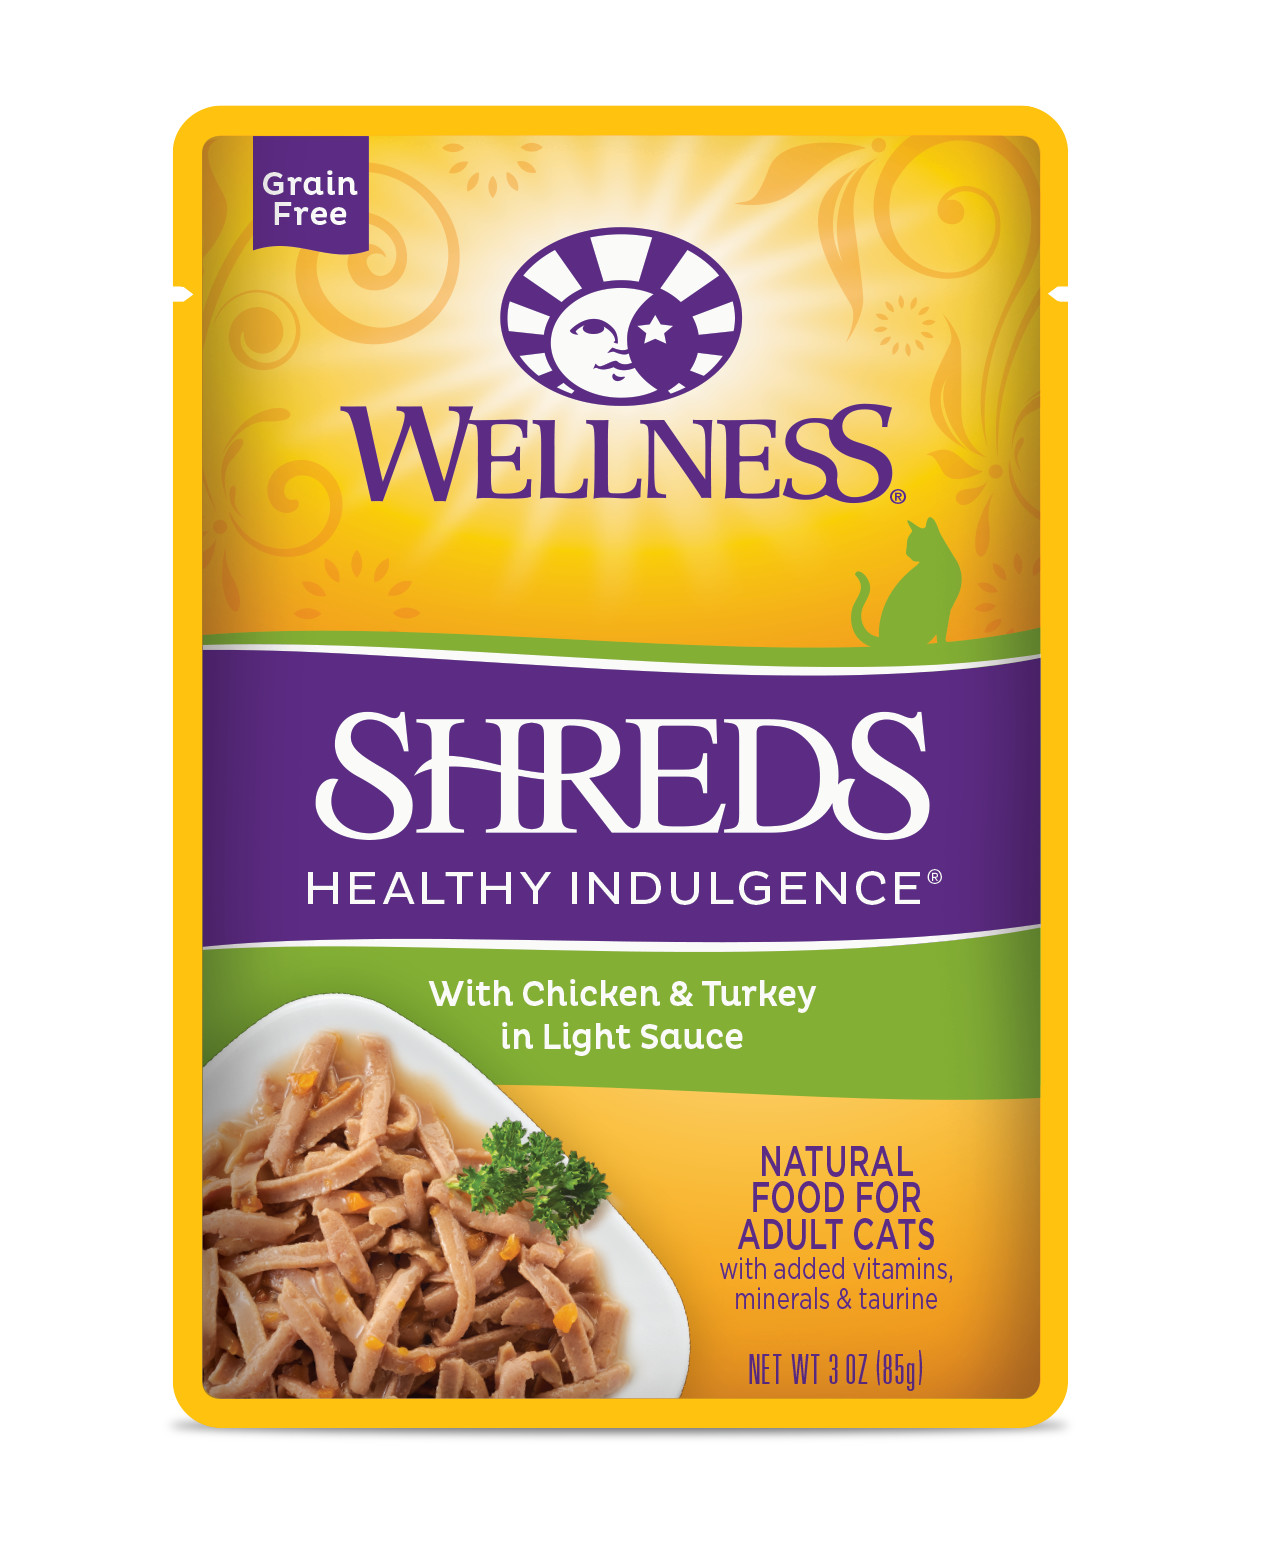 Wellness Healthy Indulgence Shreds with Chicken & Turkey in Light Sauce - image 1 of 4